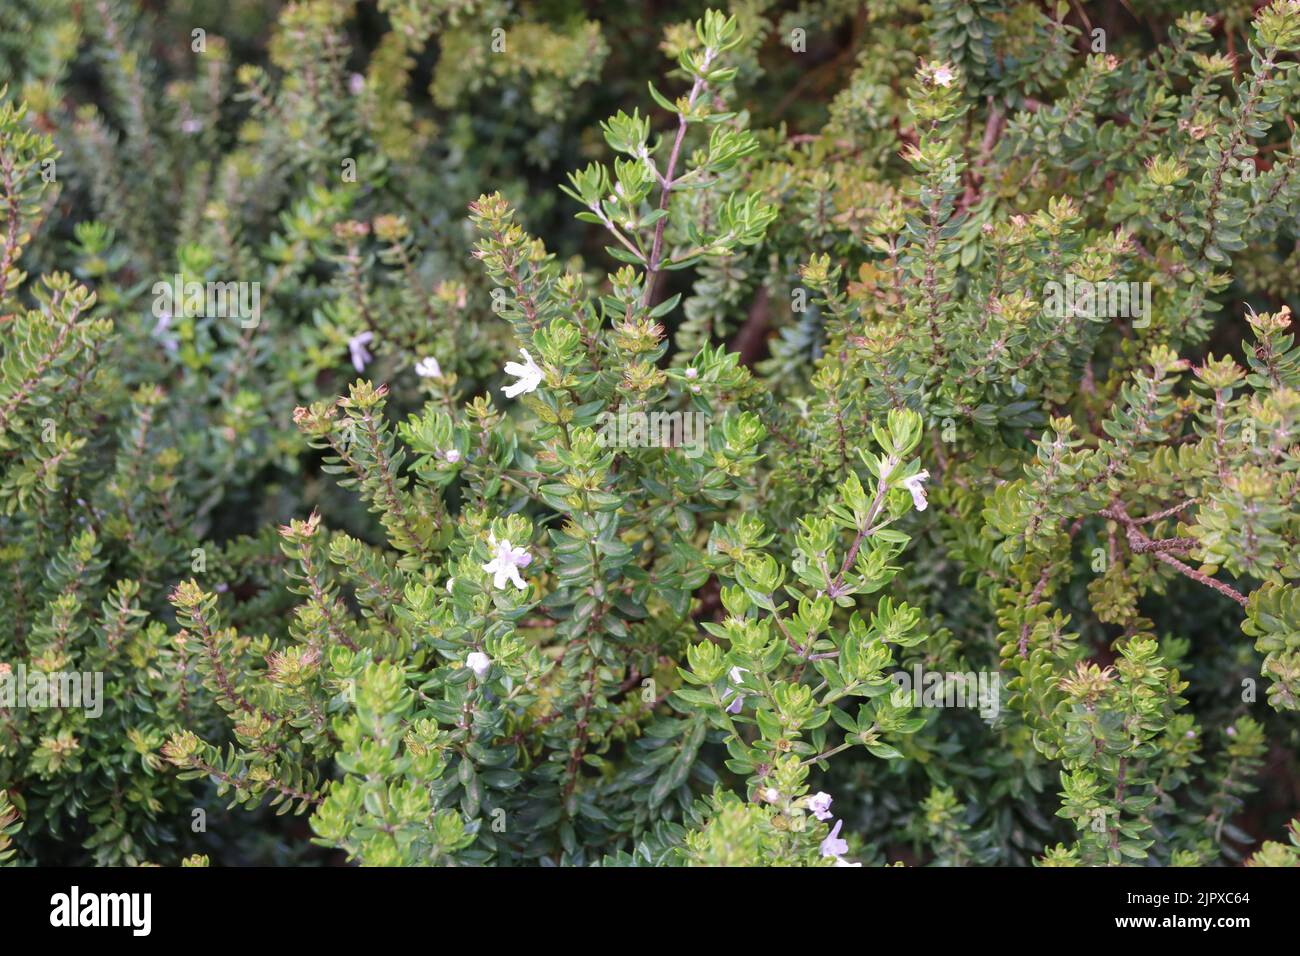 A closeup shot of the growth of Westringia bush plants with white flowers Stock Photo